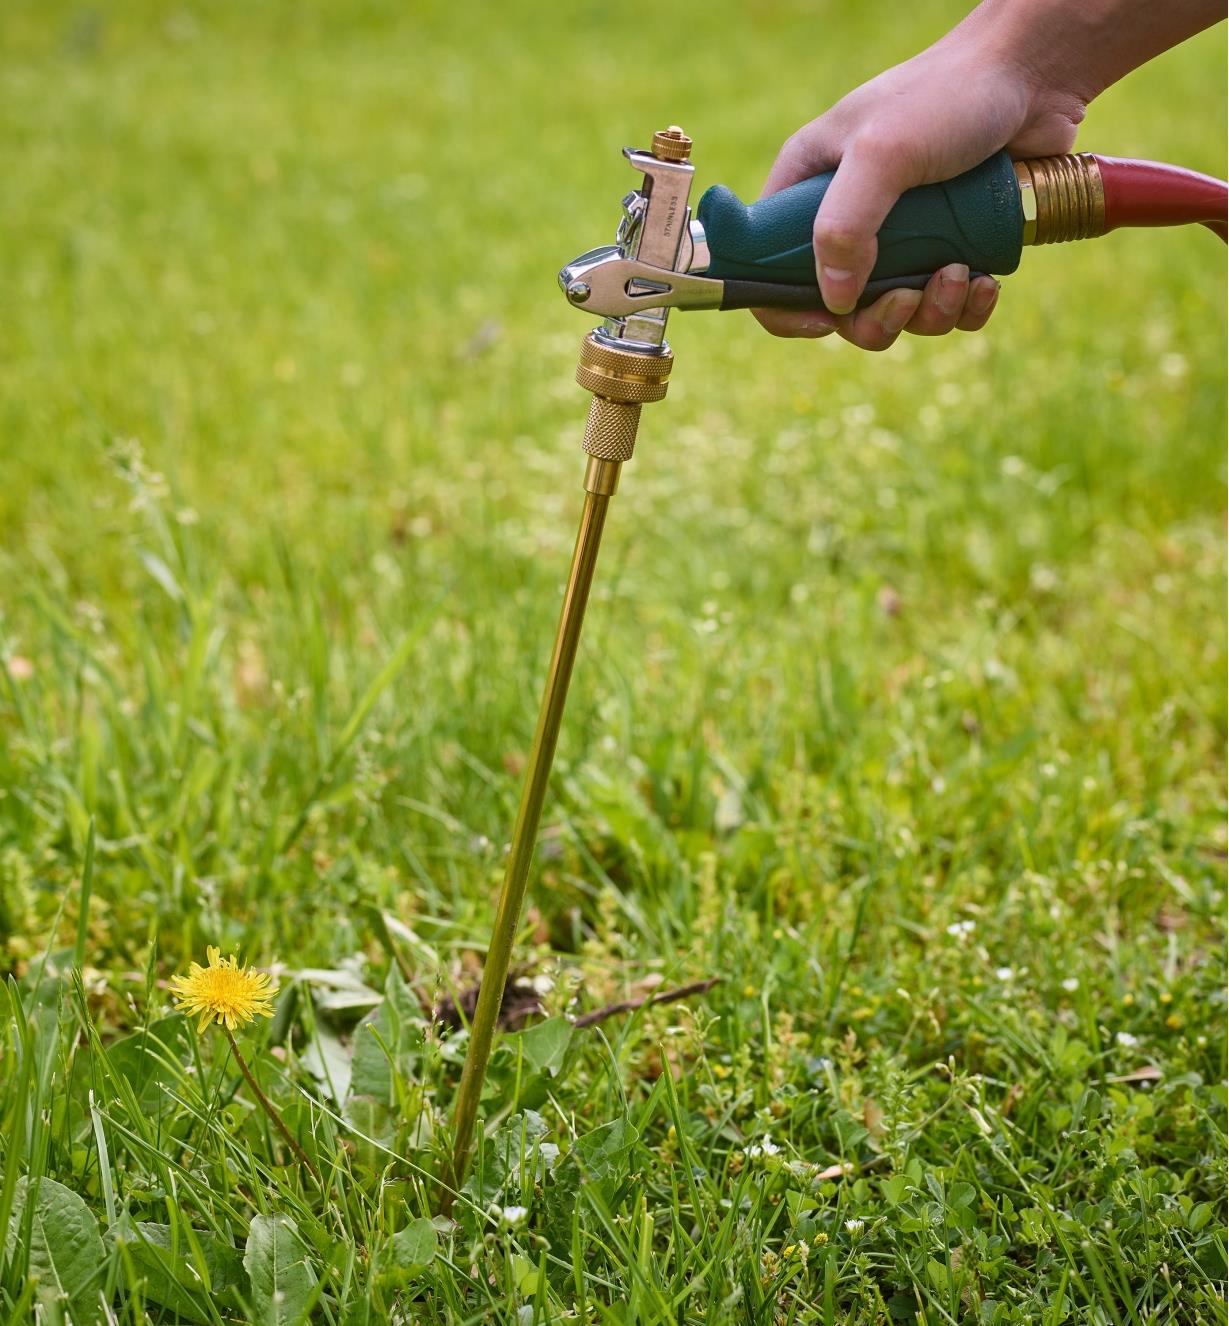 Using a water-powered weeder to remove a dandelion from a lawn